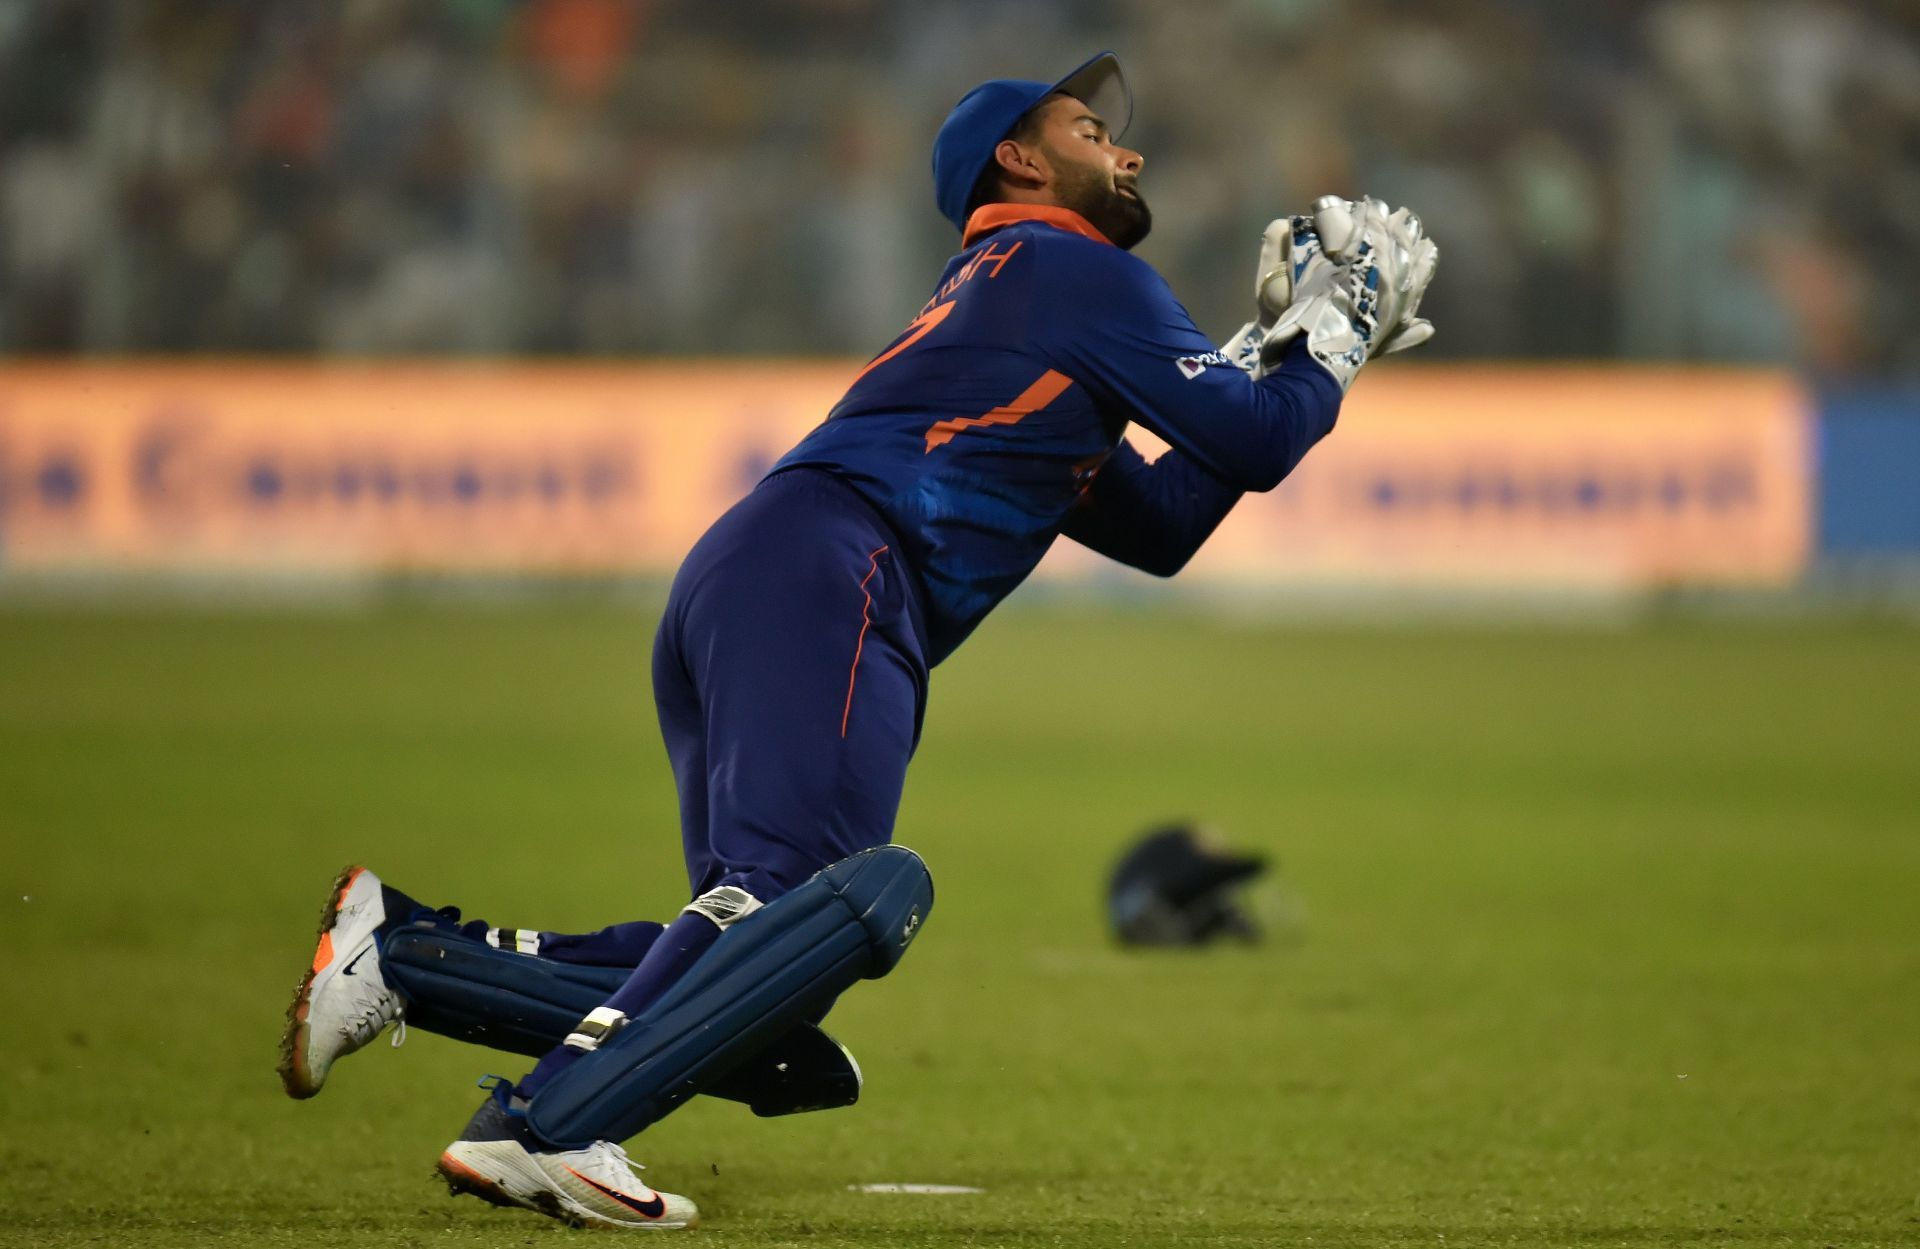 Rishabh Pant will lead India in the absence of KL Rahul (Image courtesy: Getty Images)